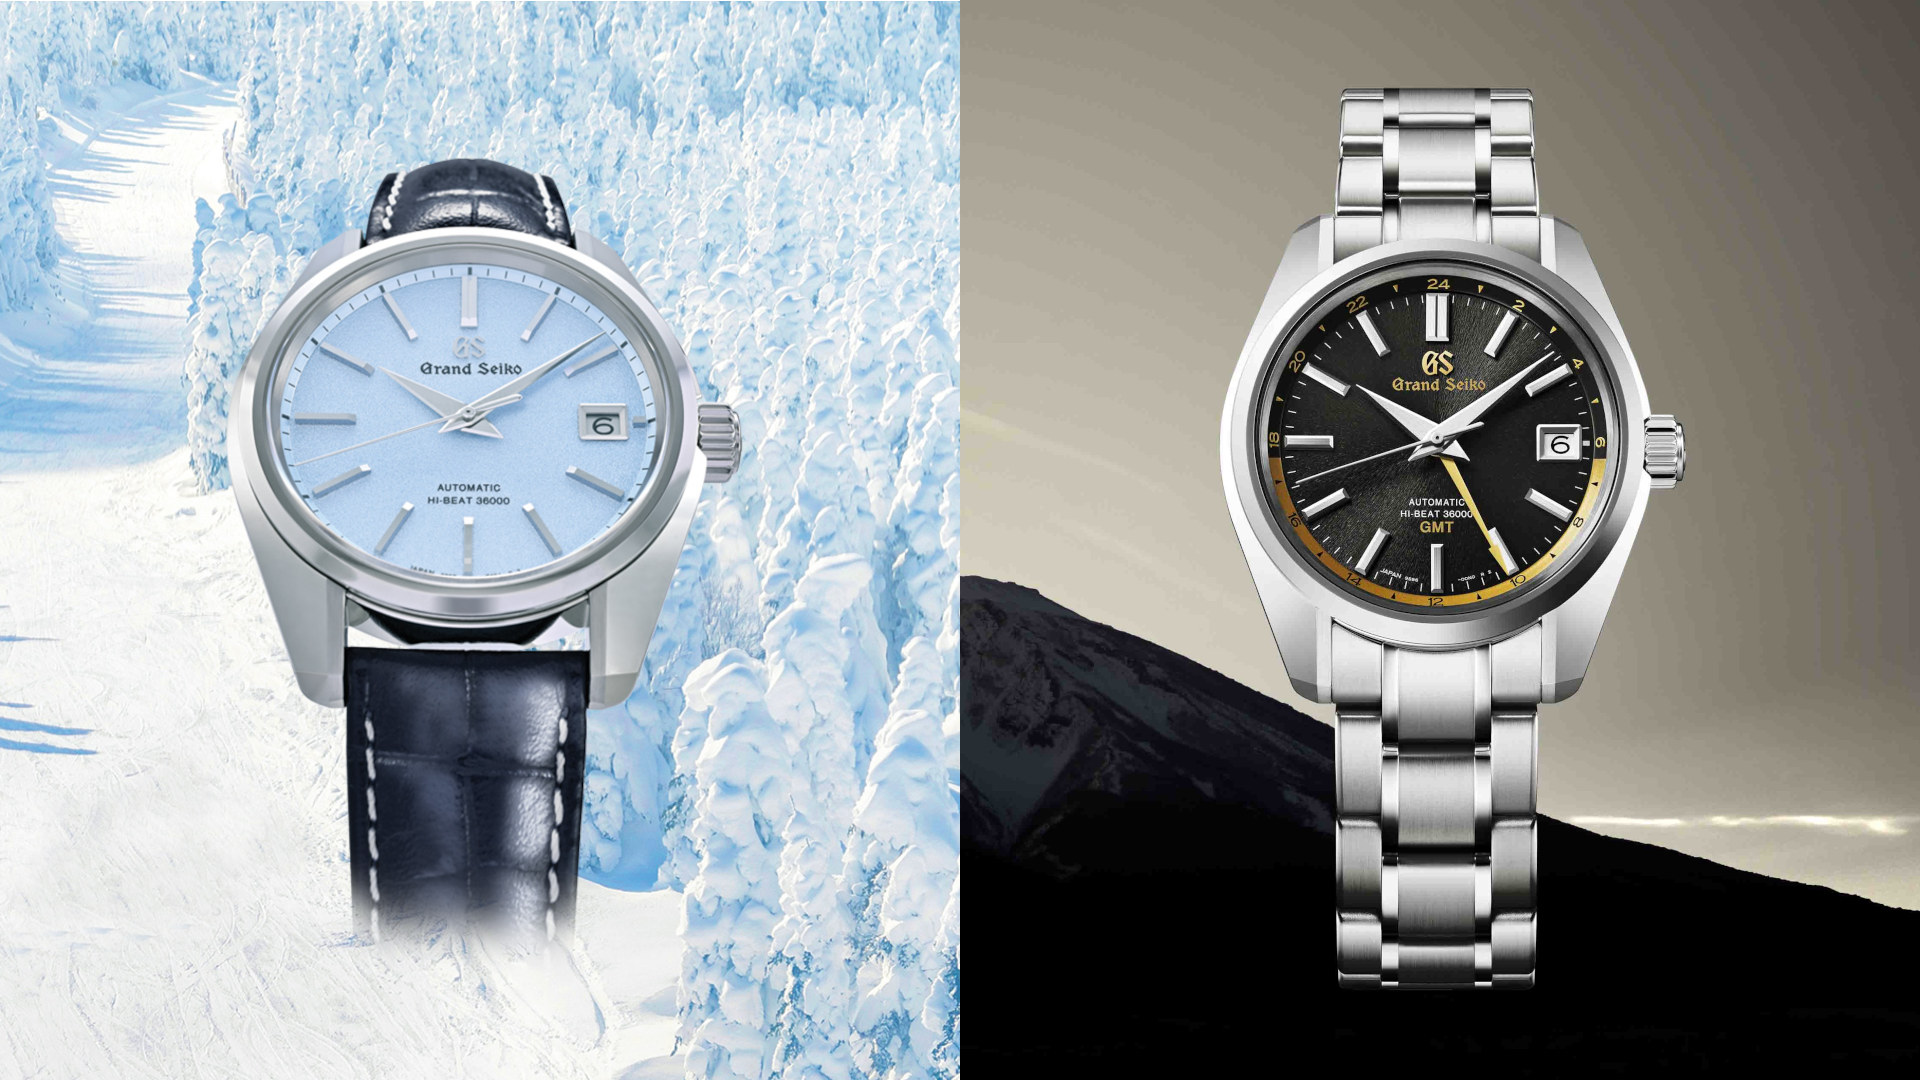 Two New Grand Seiko Watches Bring the Beauty of Japan’s Landscape Exclusively to Our Region